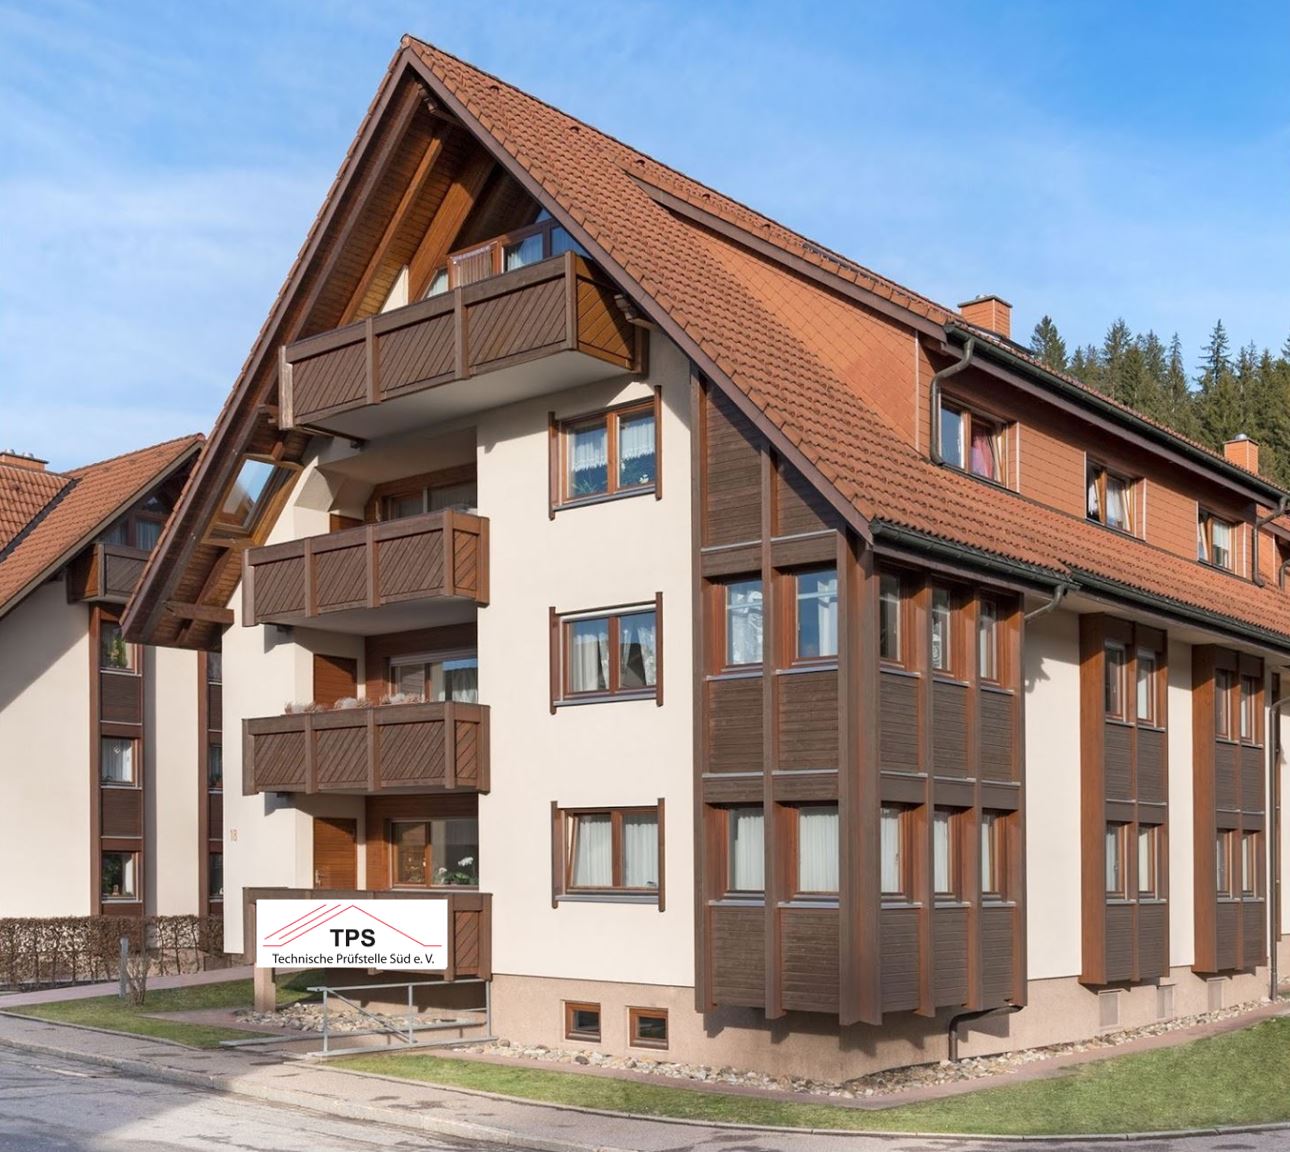 tps titisee t